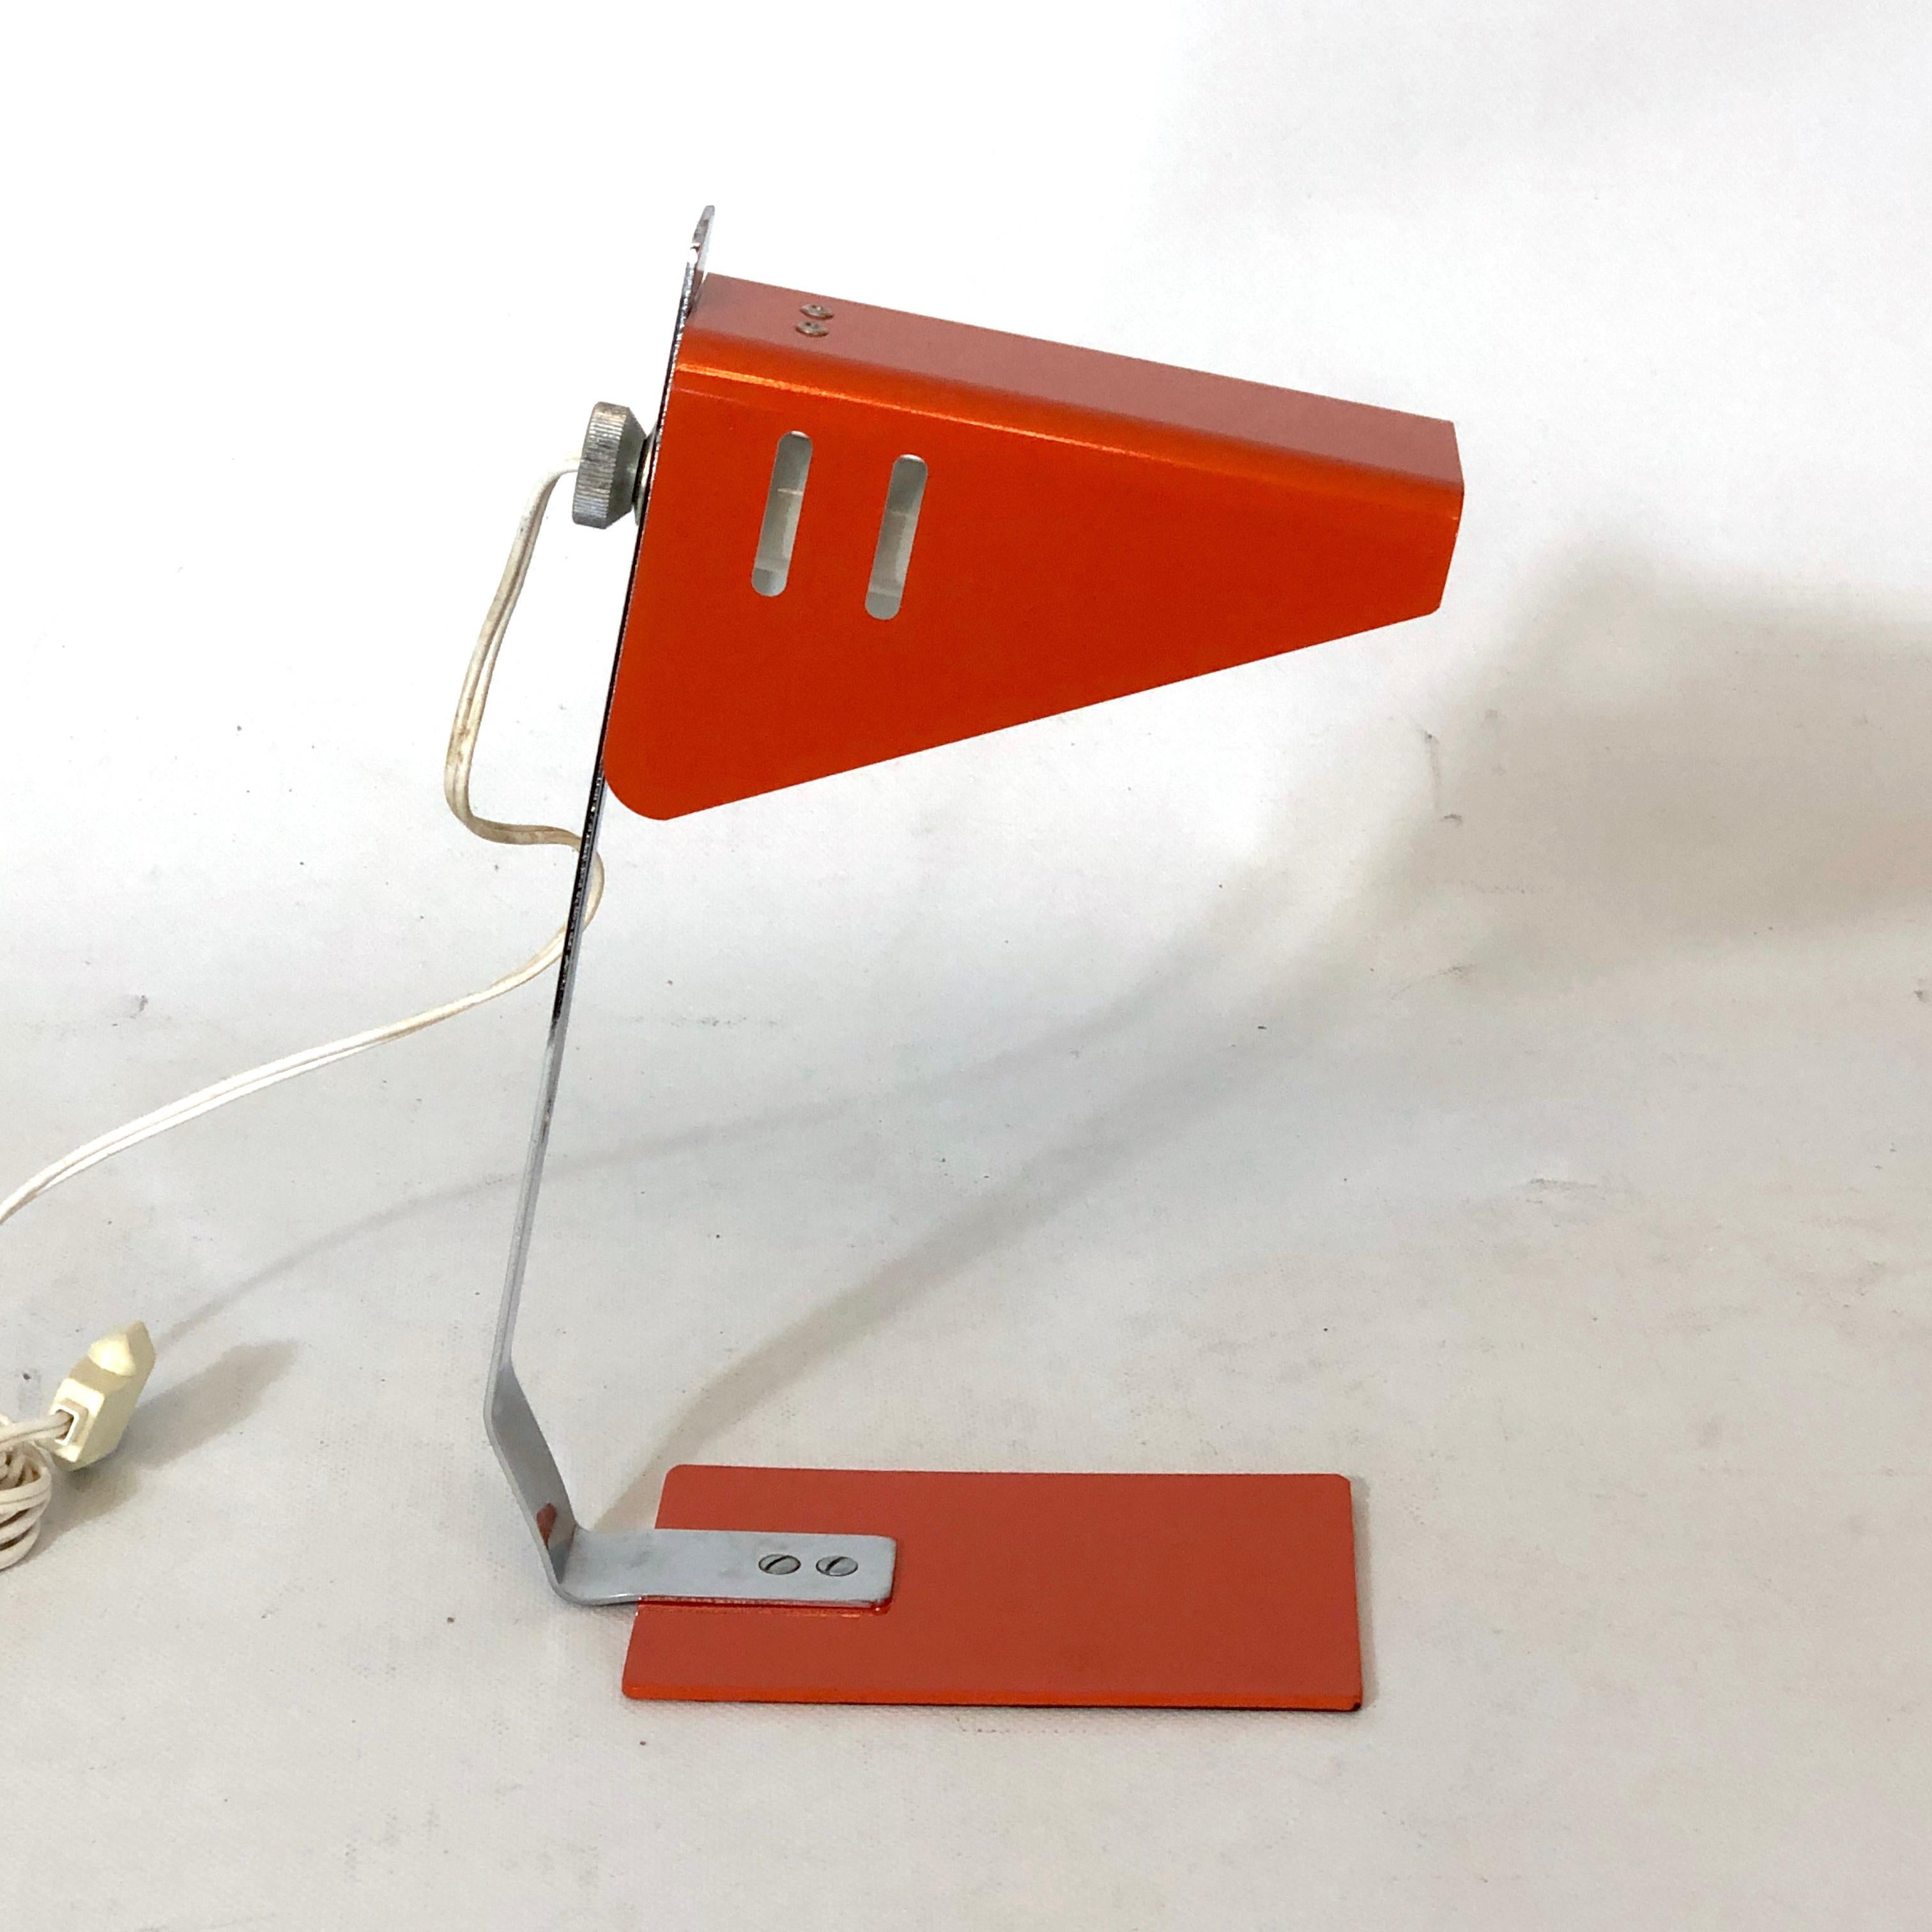 Great stock fund condition for this desk lamp produced in Italy during the 70s and made from lacquer and chrome. Full working with EU standard, adaptable on demand for USA standard.